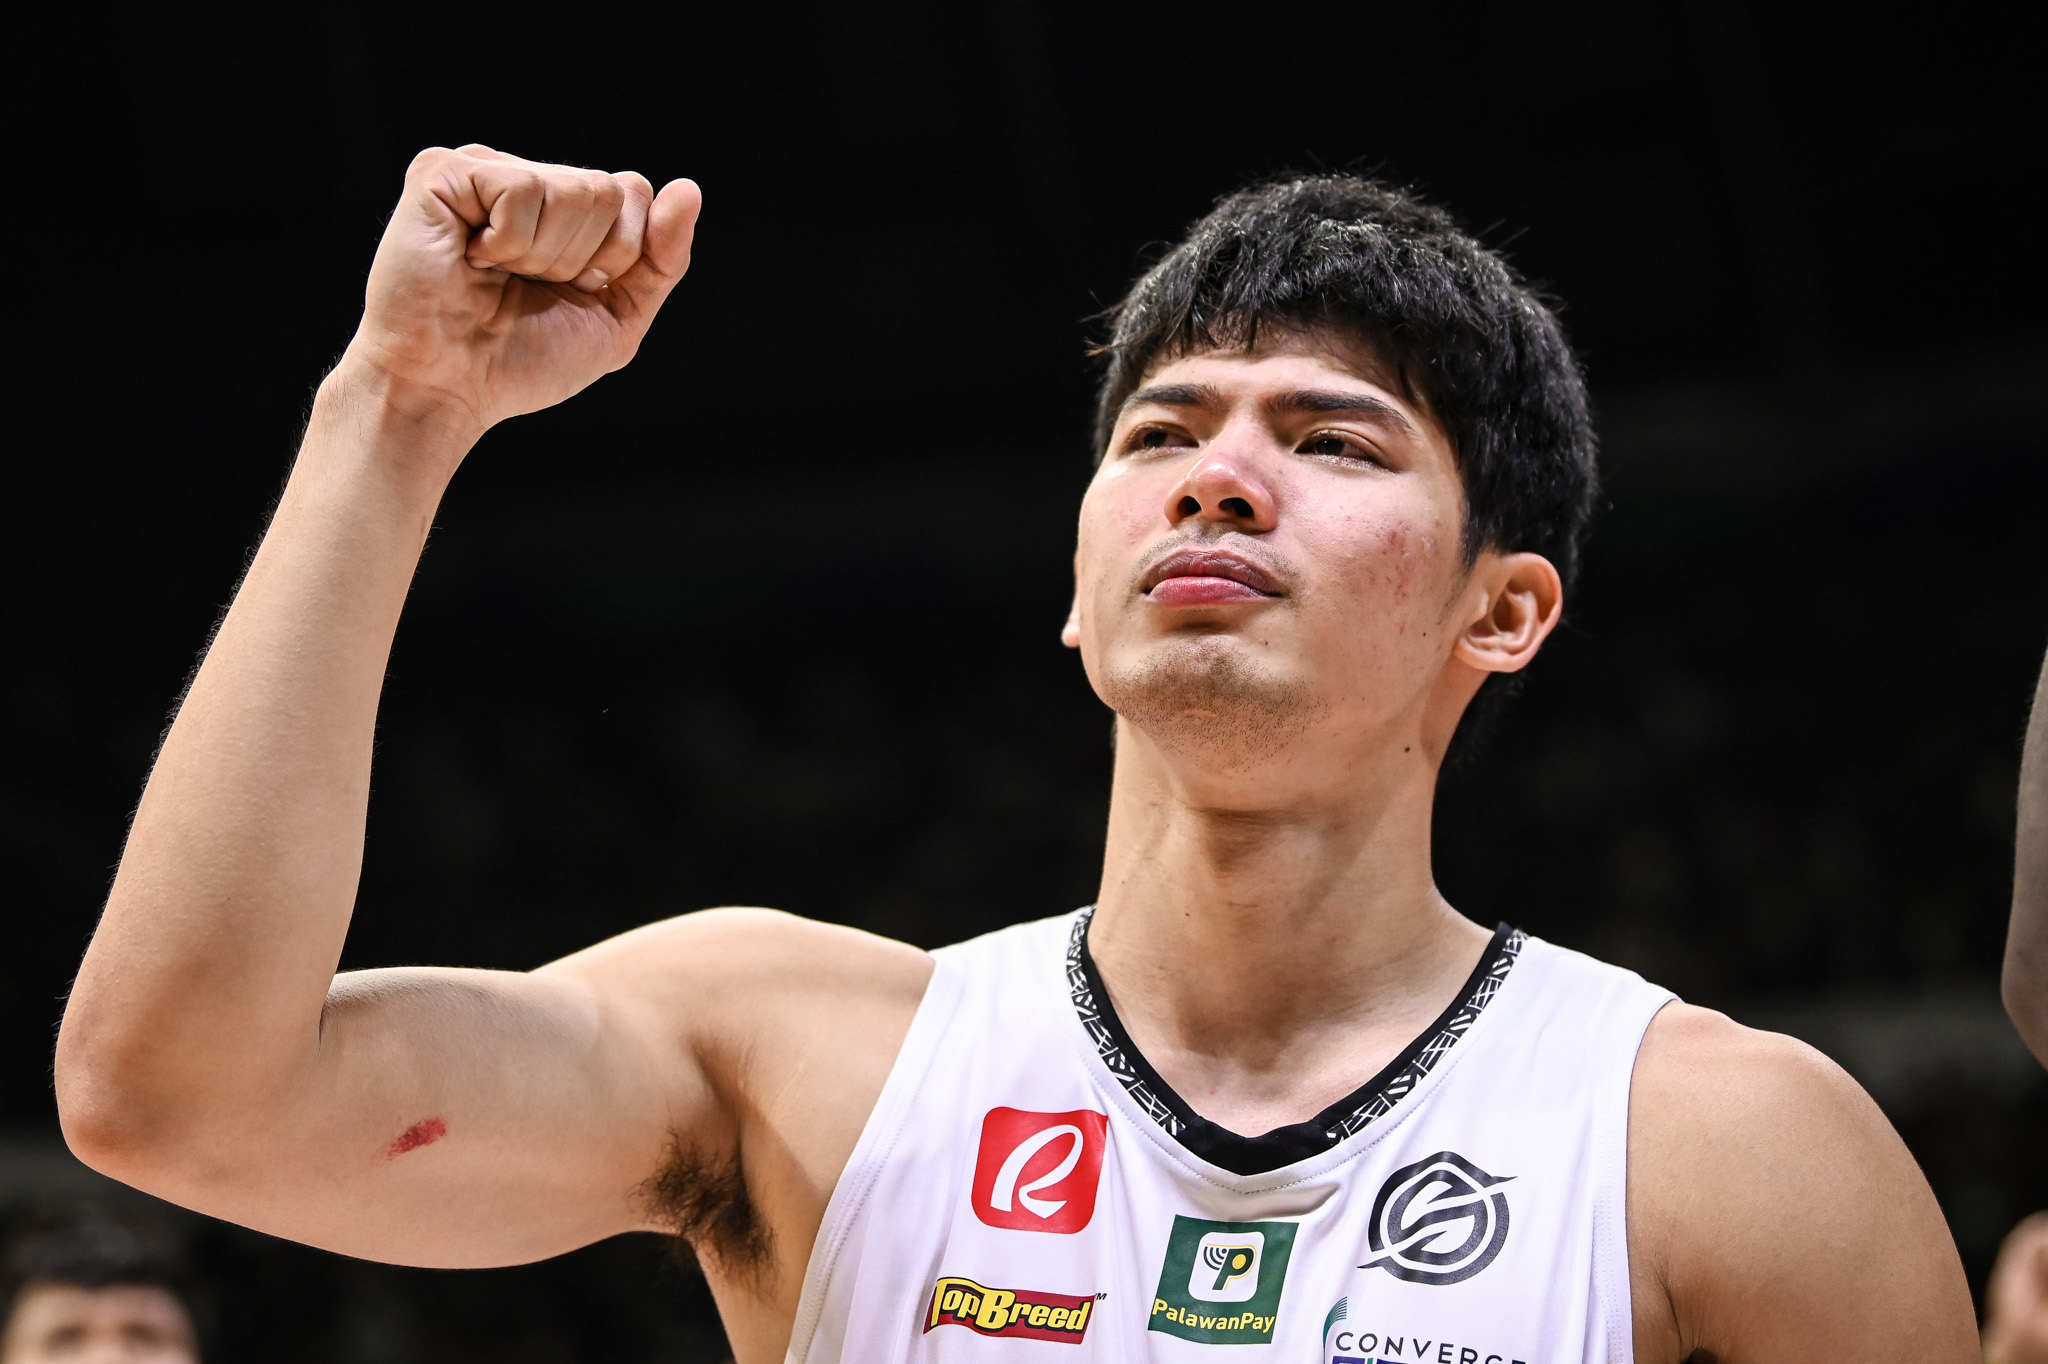 UAAP86-MBB-G3-CJ-Cansino-8147 Though saddened that UAAP title came at expense of Cansino, Nonoy says it's his time Basketball News UAAP UST  - philippine sports news